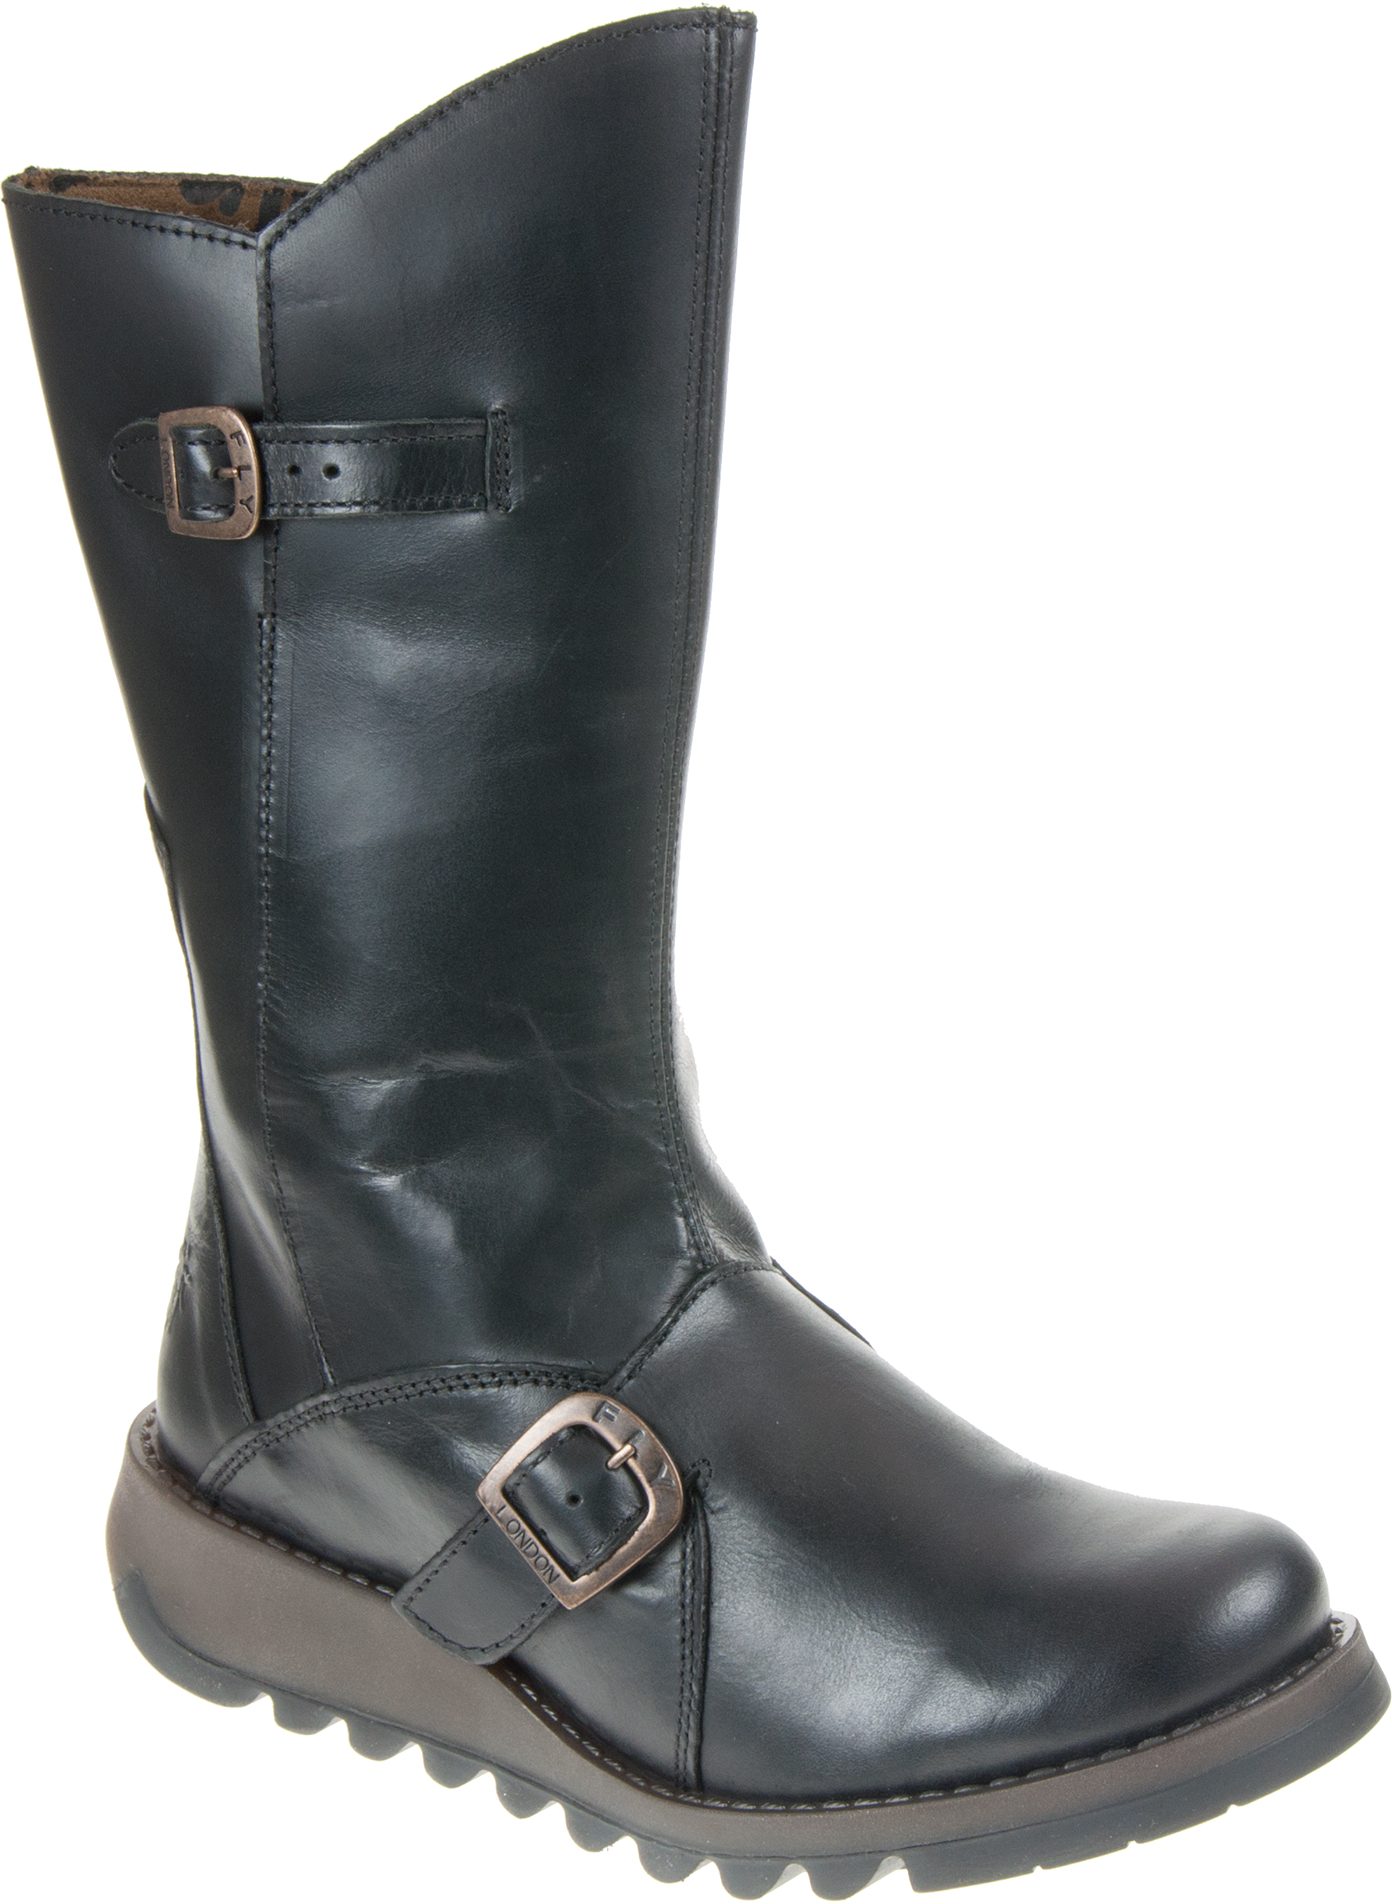 Fly London Mes 2 Black P142913 005 - Calf Boots - Humphries Shoes